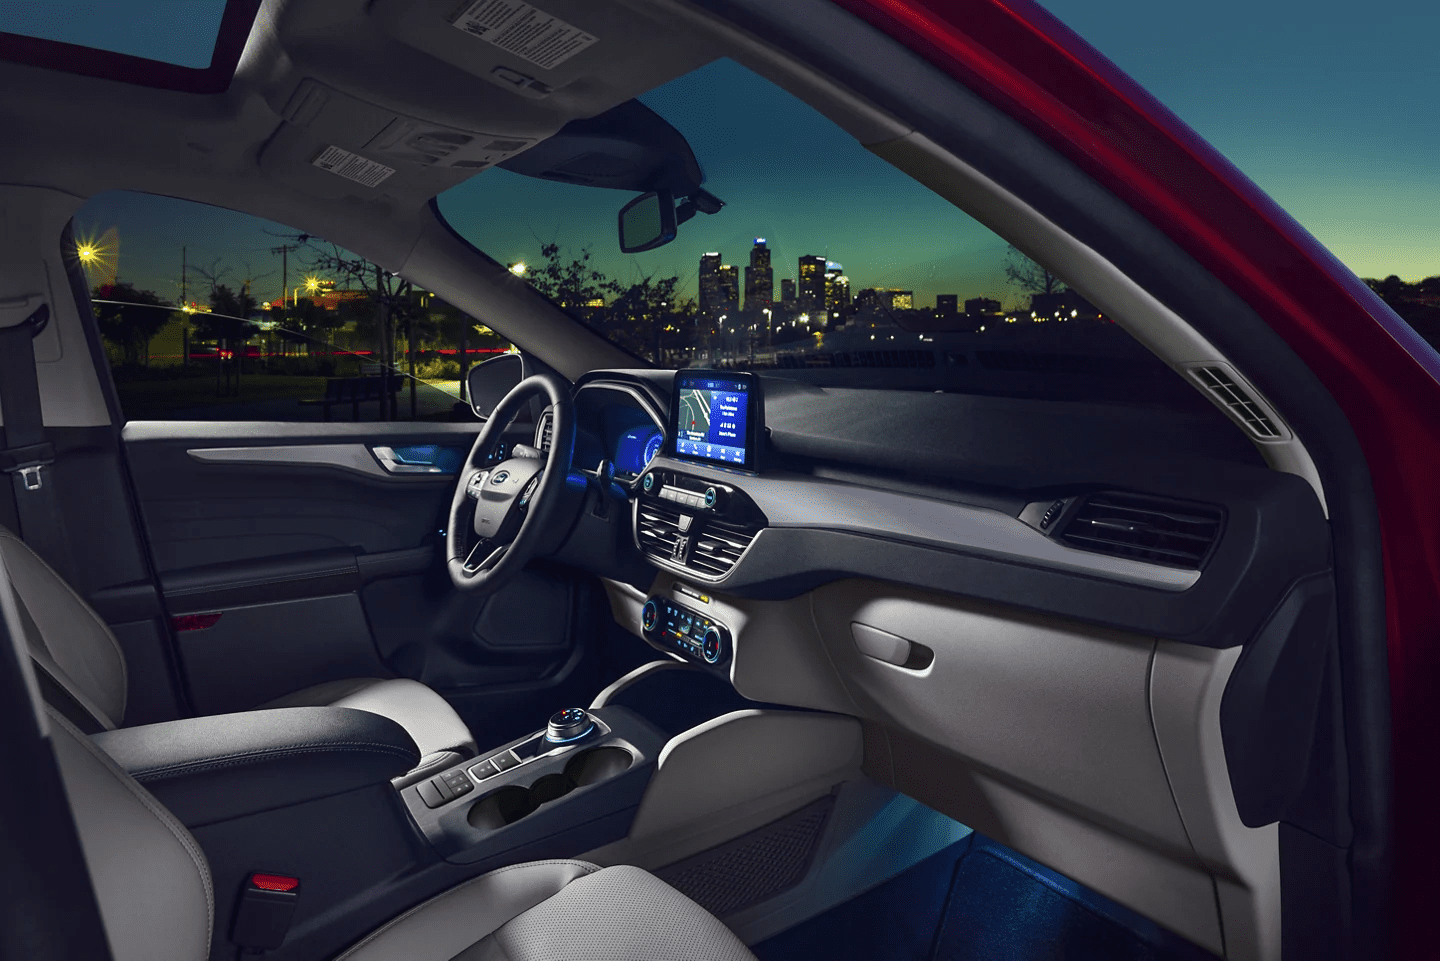 2022 Ford Escape dashboard under the sunset